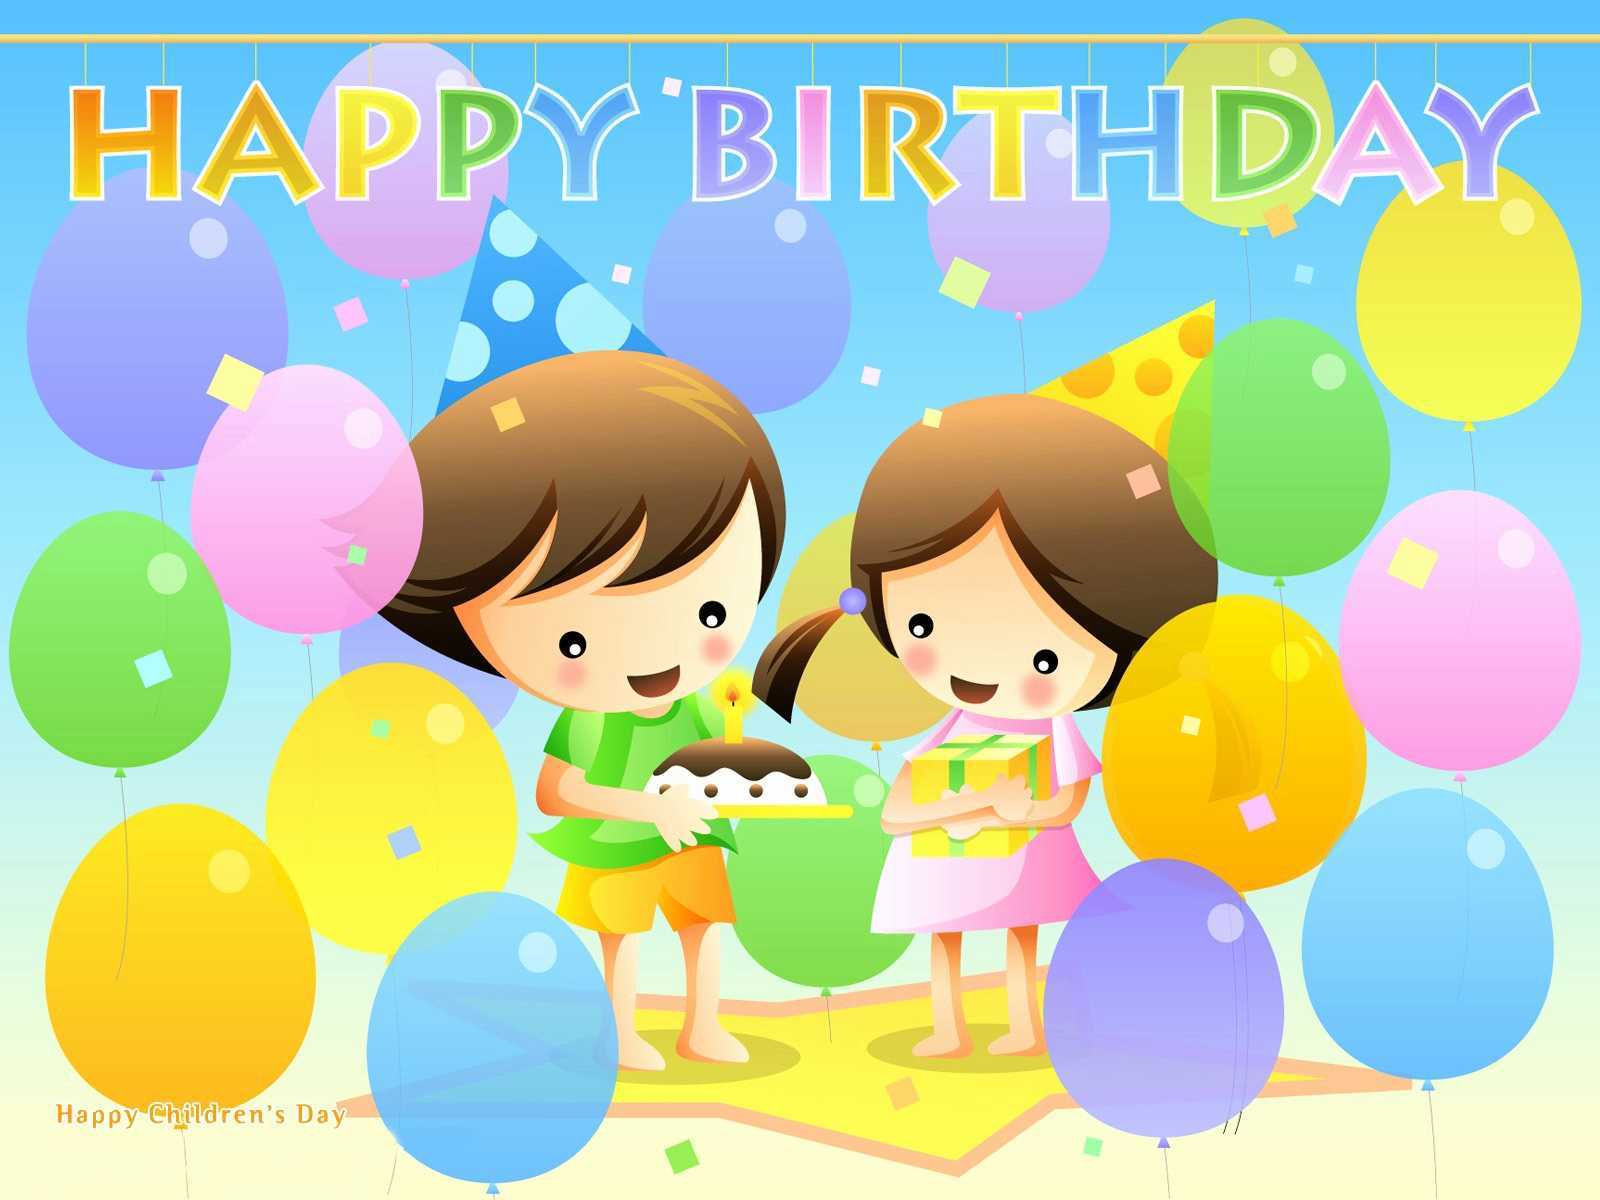 Download 12 New Happy Birthday Image Wallpaper Picture. FREE